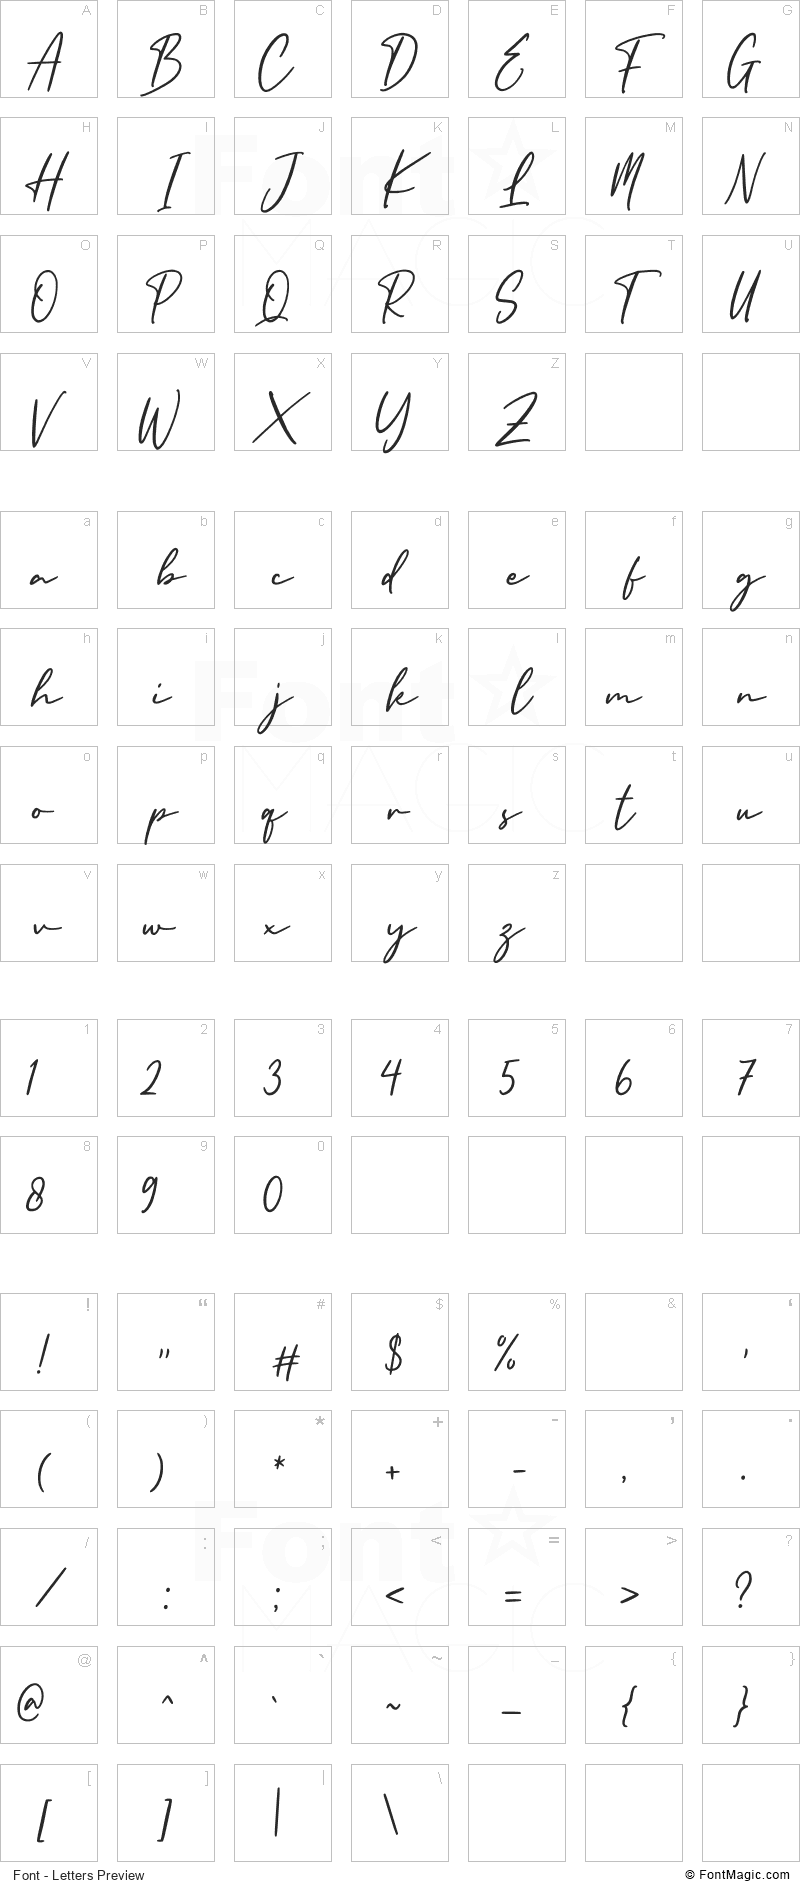 England Signature Font - All Latters Preview Chart